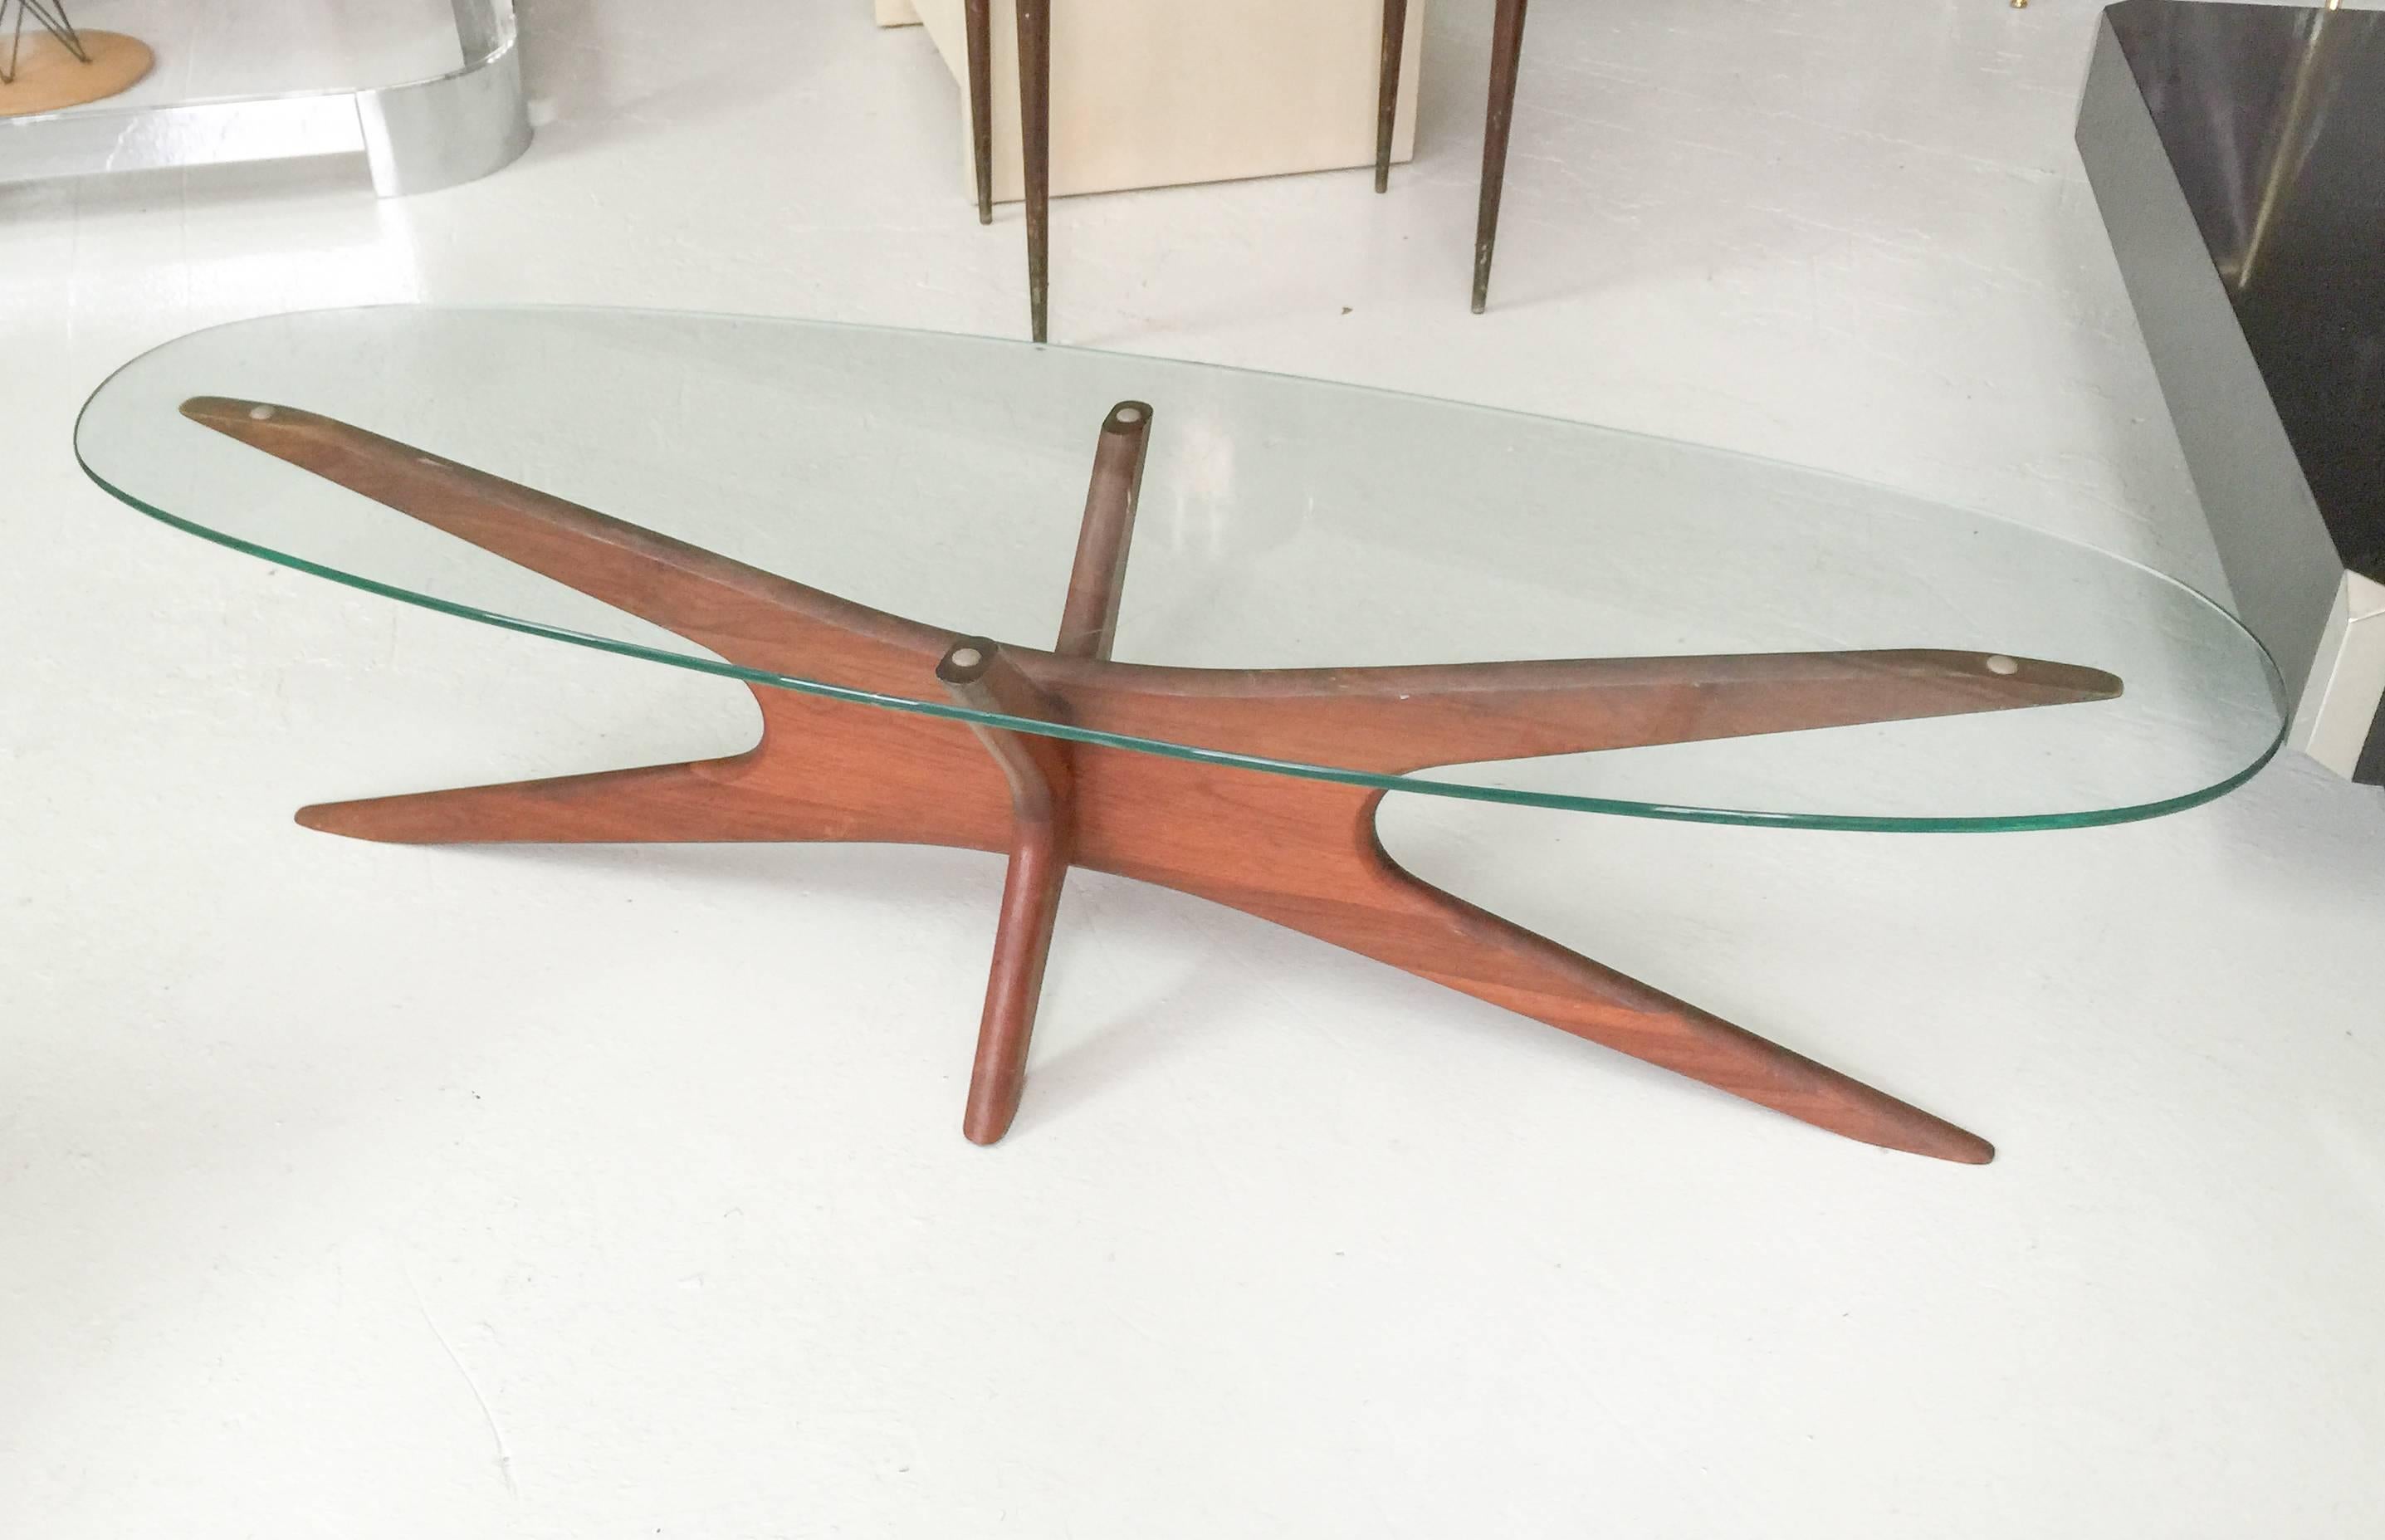 Elongated Jacks cocktail table by Adrian Pearsall
in walnut with elliptical glass top.
